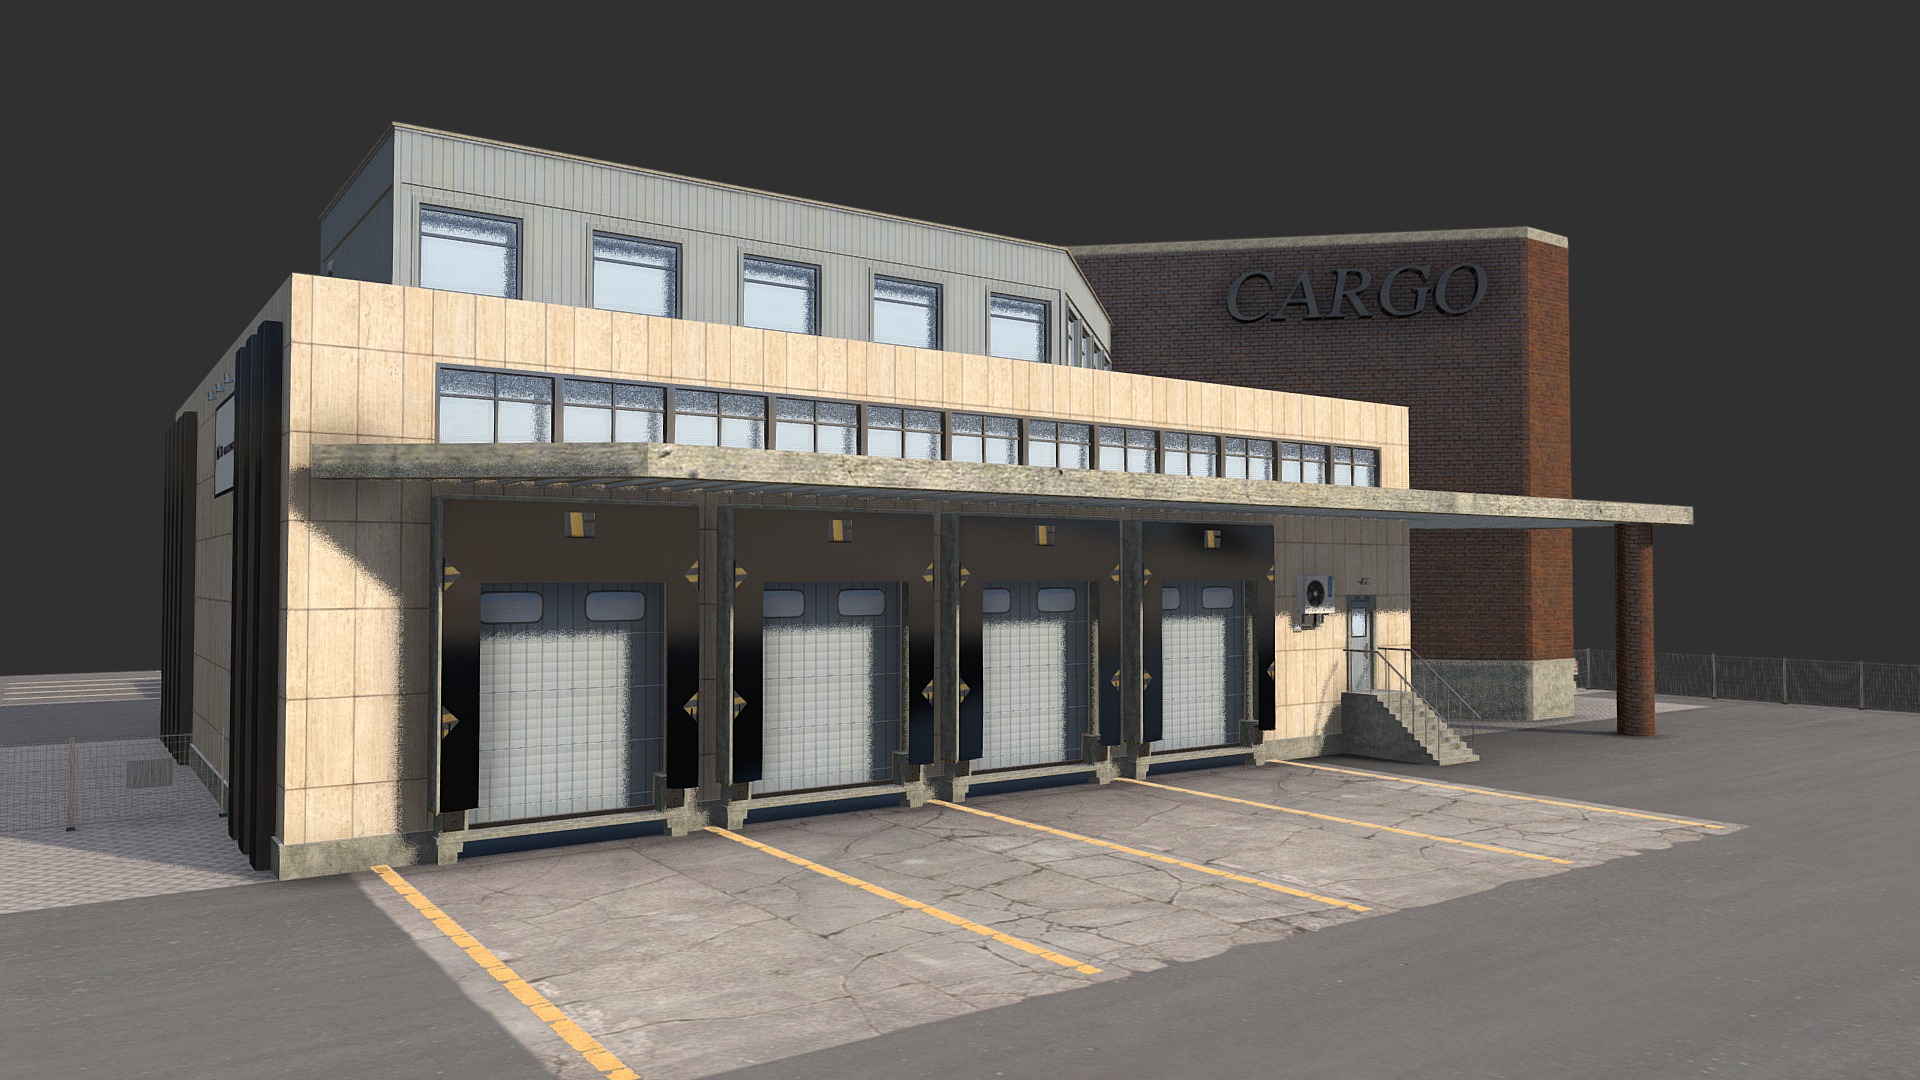 3D model Cargo - This is a 3D model of the Cargo. The 3D model is about a building with a sign on the front.